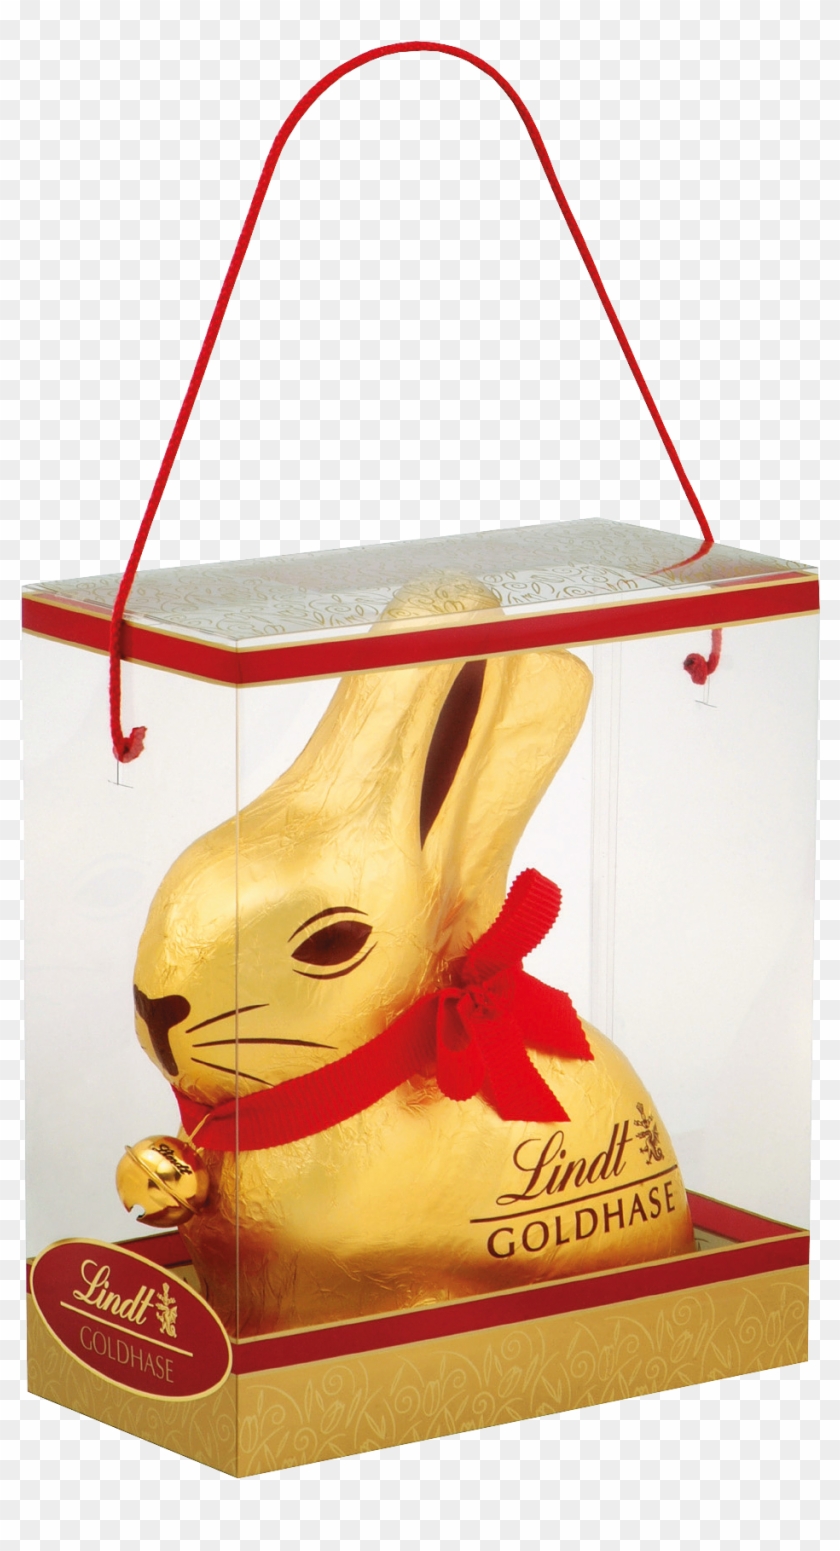 Wrapped In Its Signature Gold Foil With A Red Collar - Best Easter Eggs 2018 Clipart